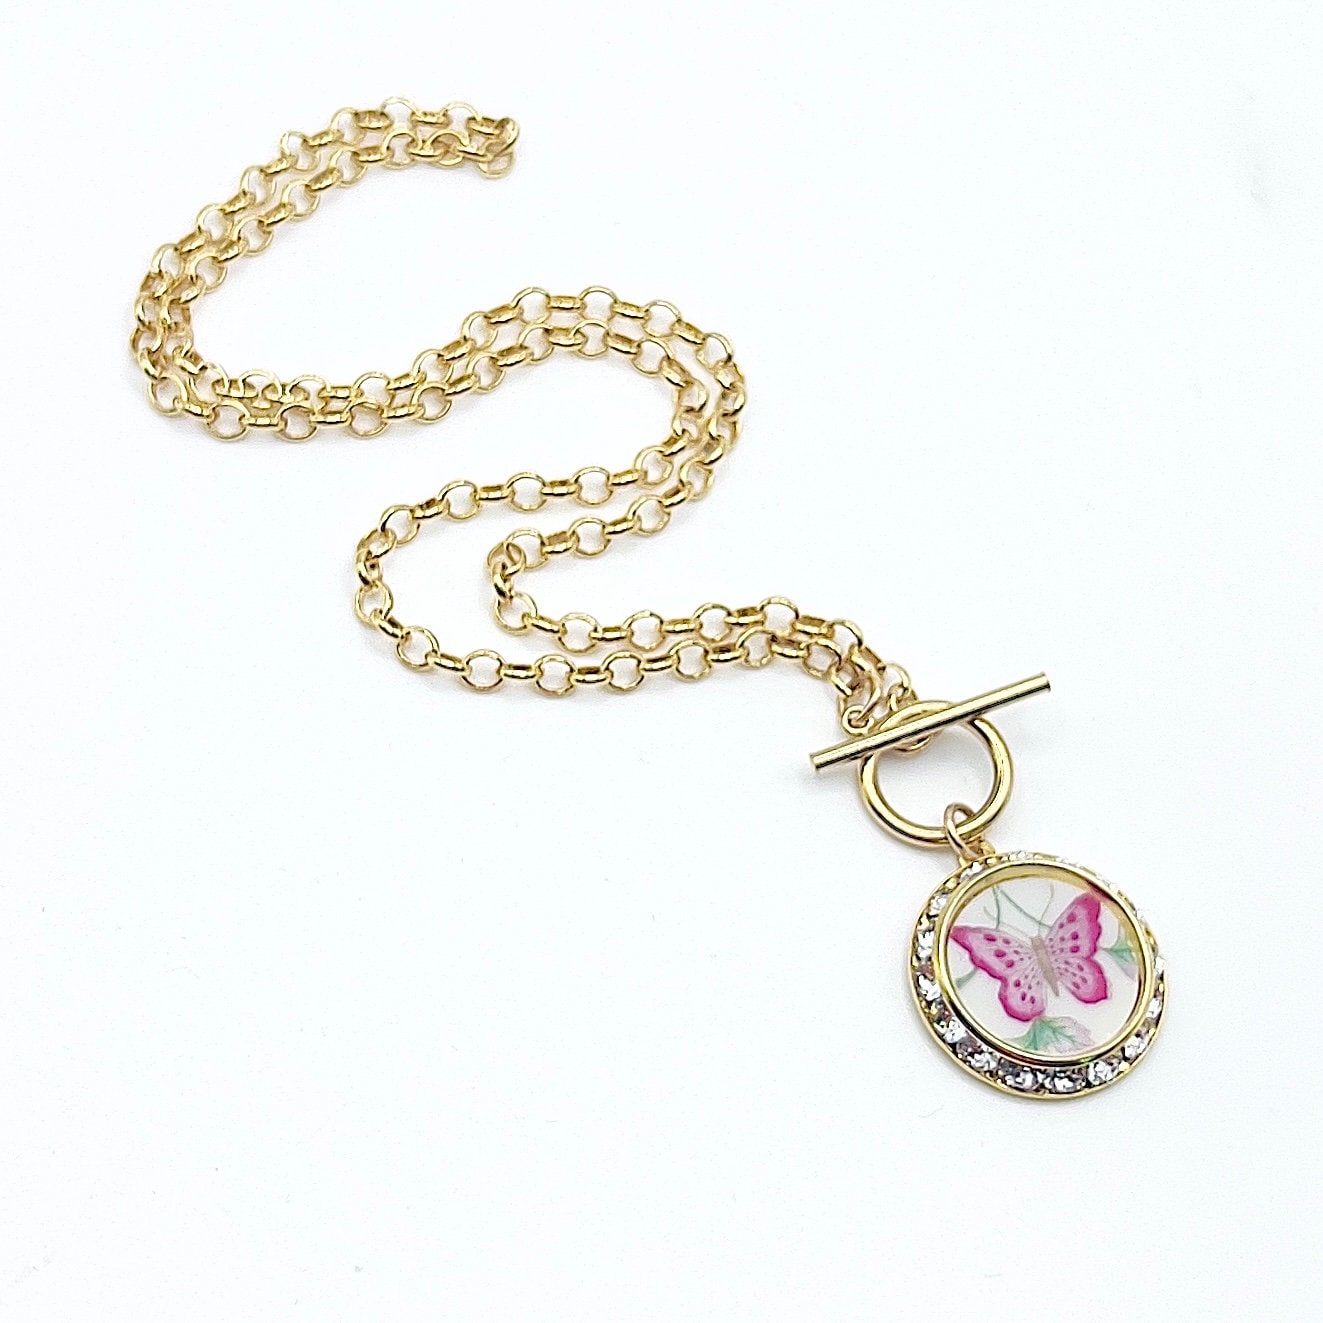 Gold Toggle Necklace, Butterfly Broken China Jewelry, Unique 15th Anniversary Crystal Gift for Wife